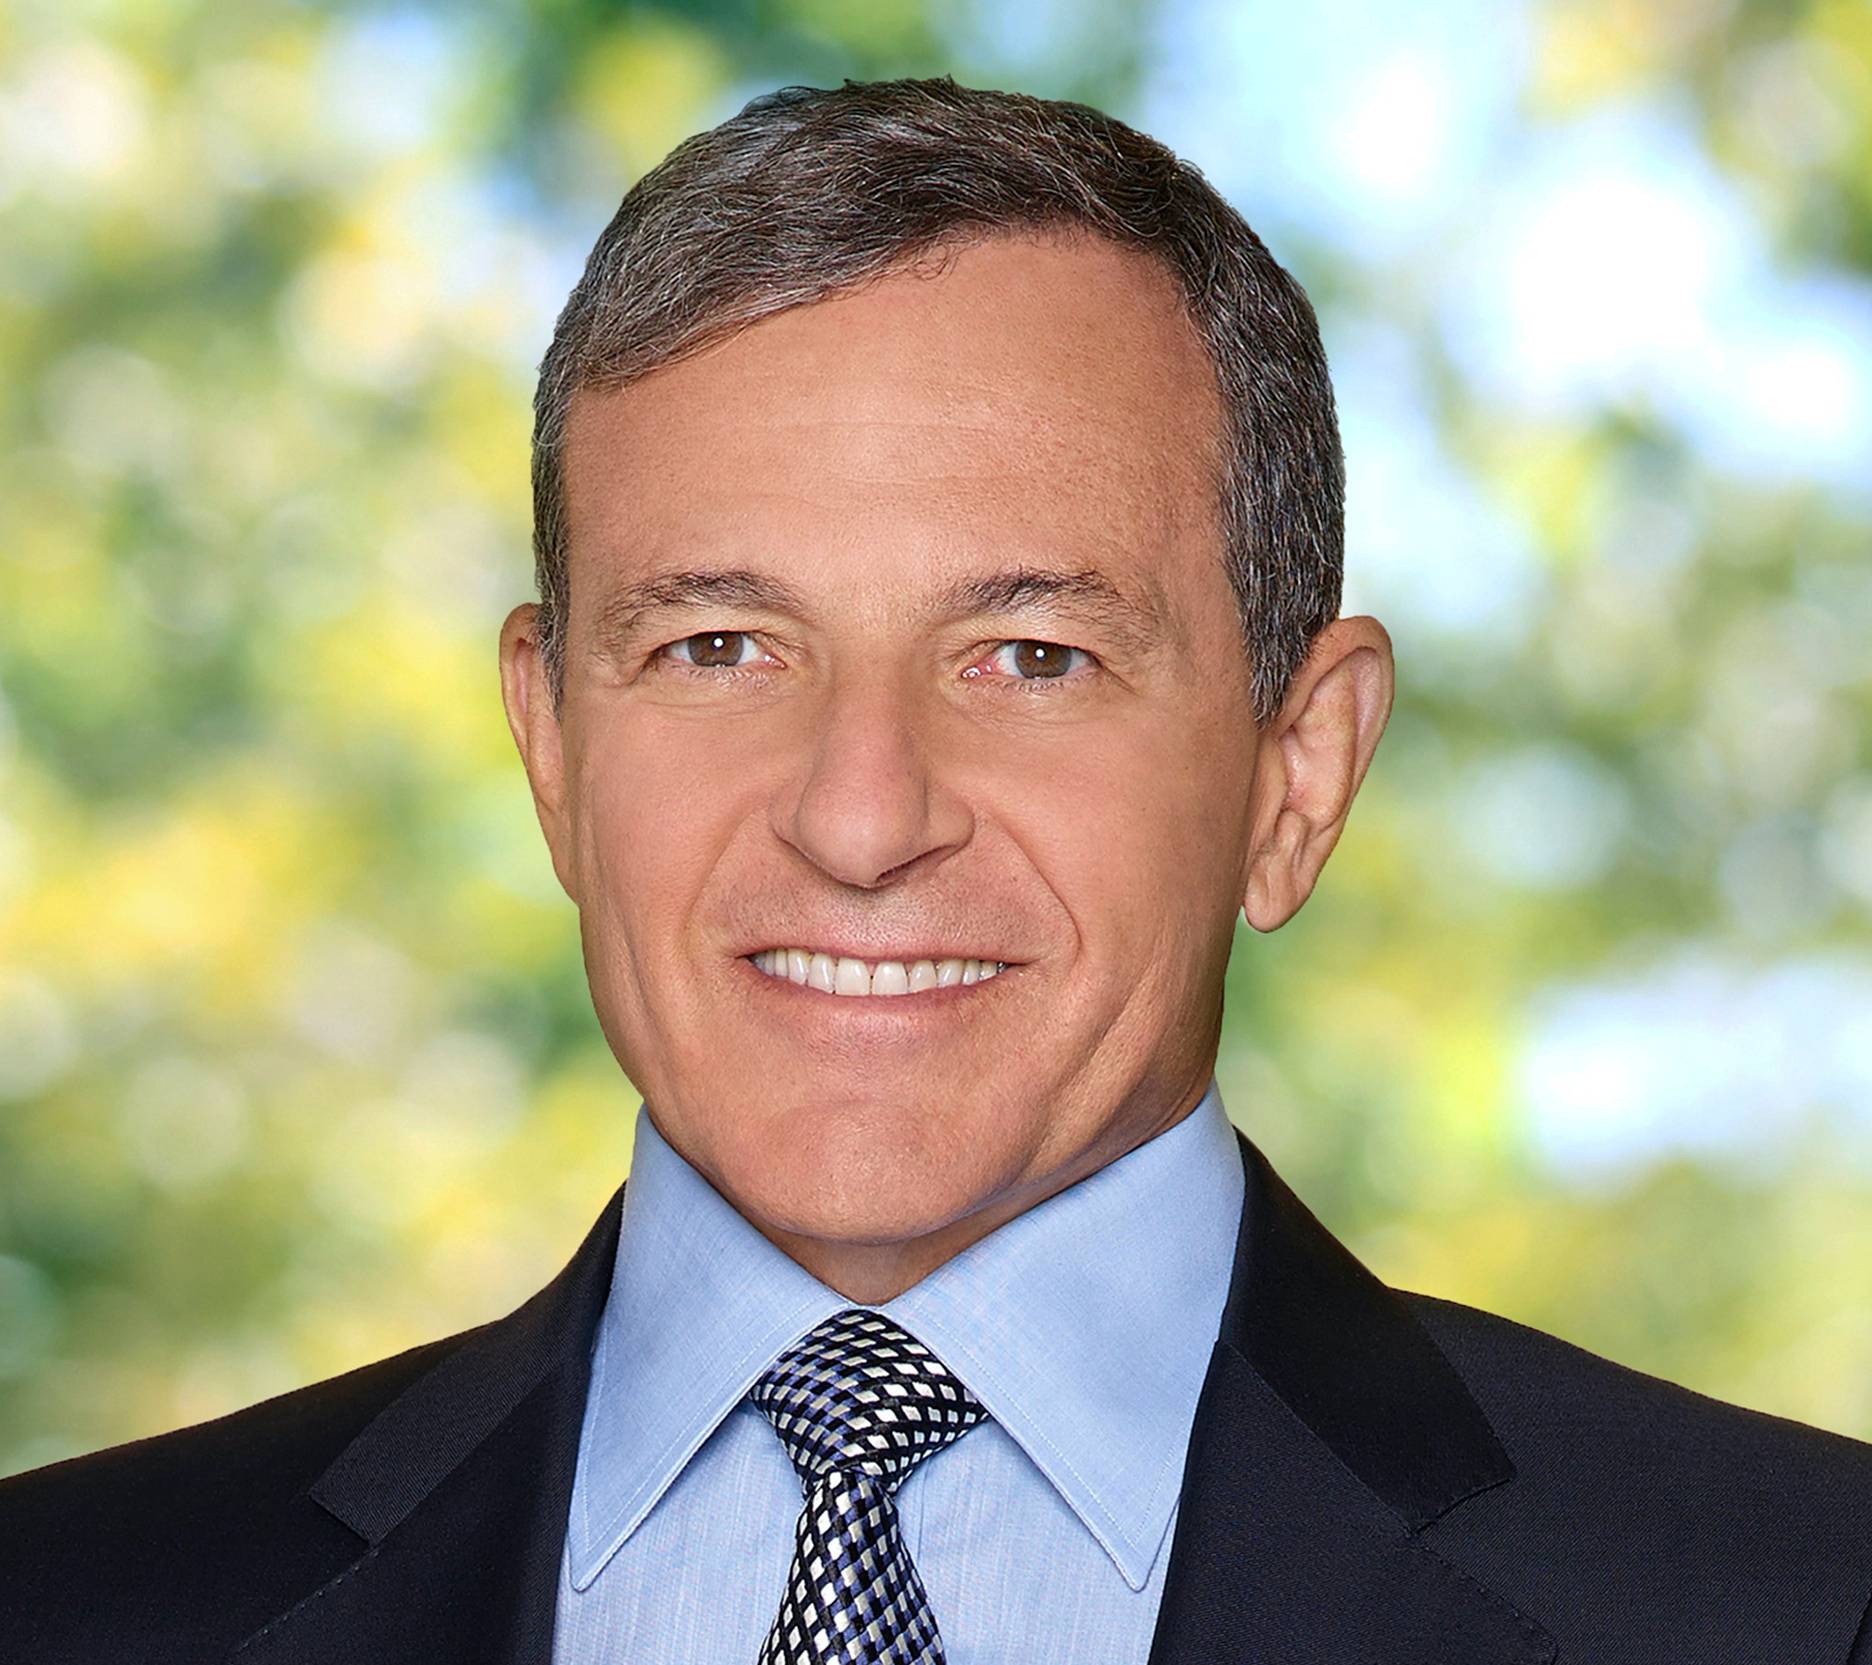 Bob Iger's first appearance at a quarterly earnings call since returning as CEO will take place Feb 8 2023